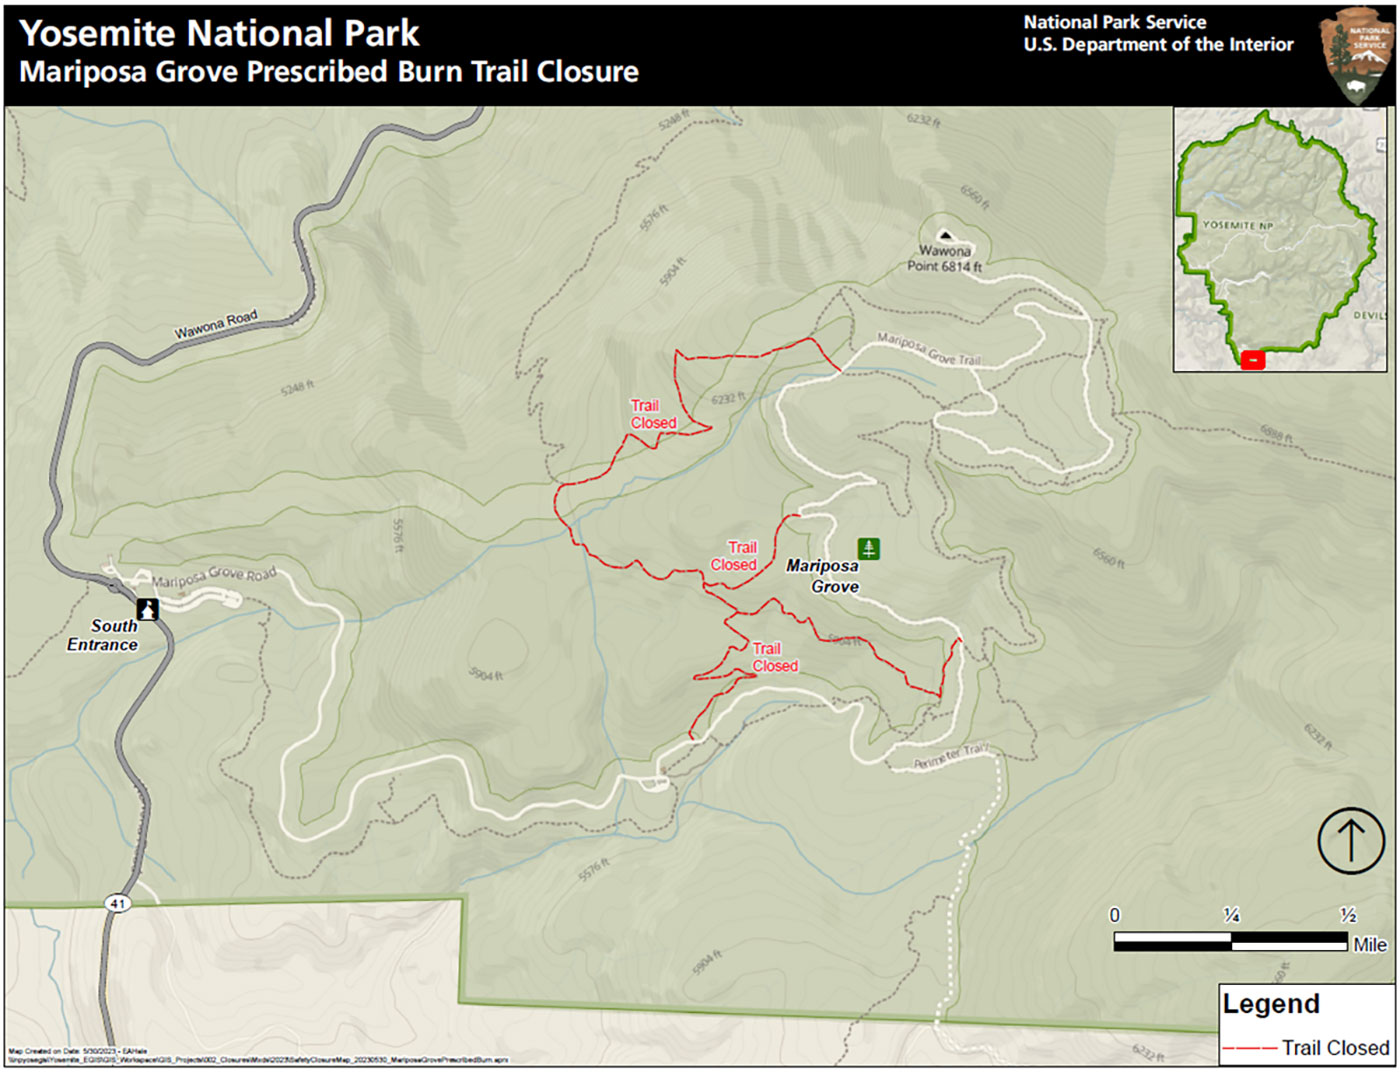 Map showing trail closures in the Mariposa Grove during prescribed burn